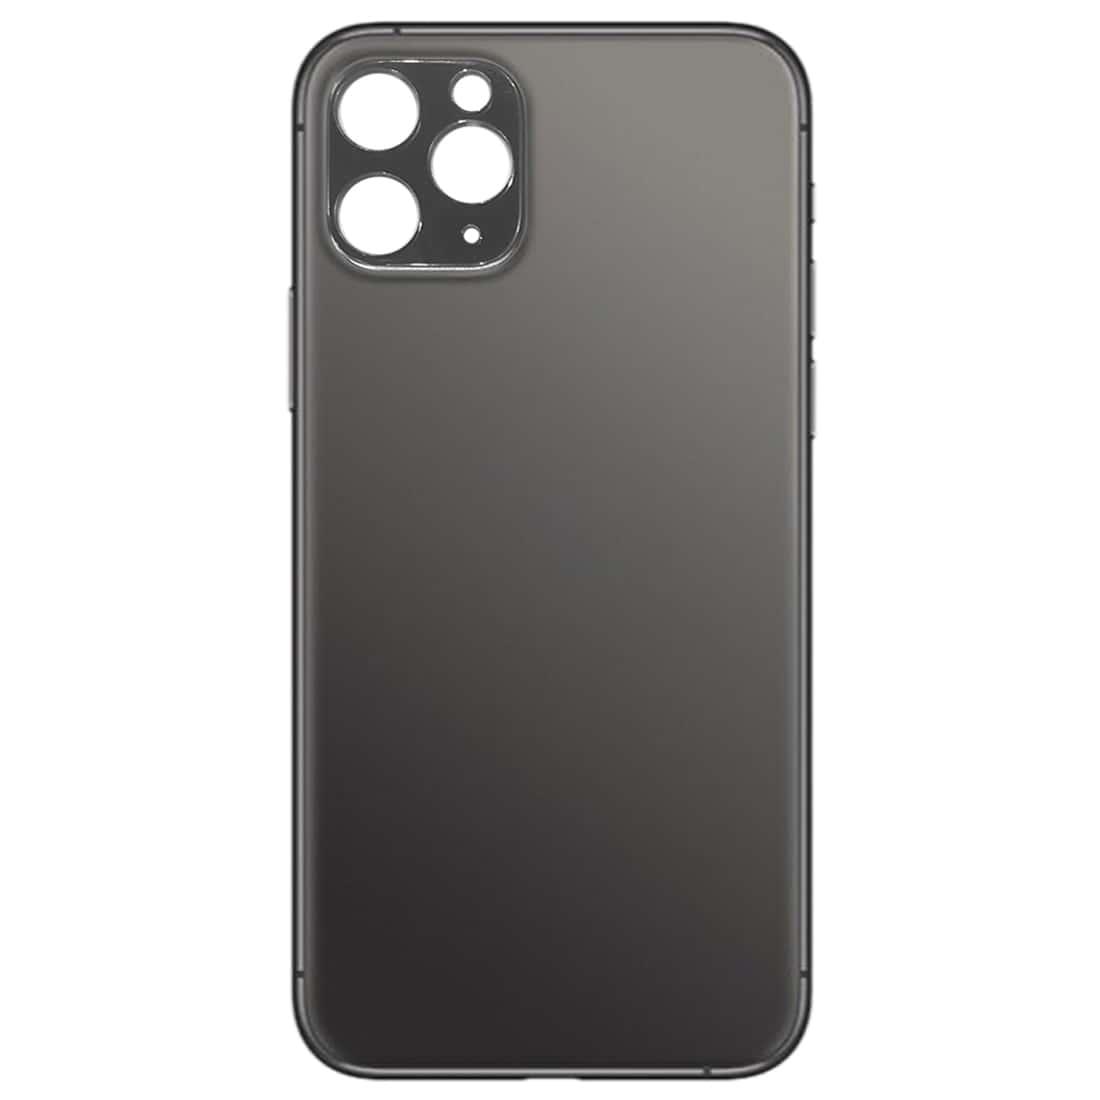 Back Glass Panel for  iPhone 11 Pro Black